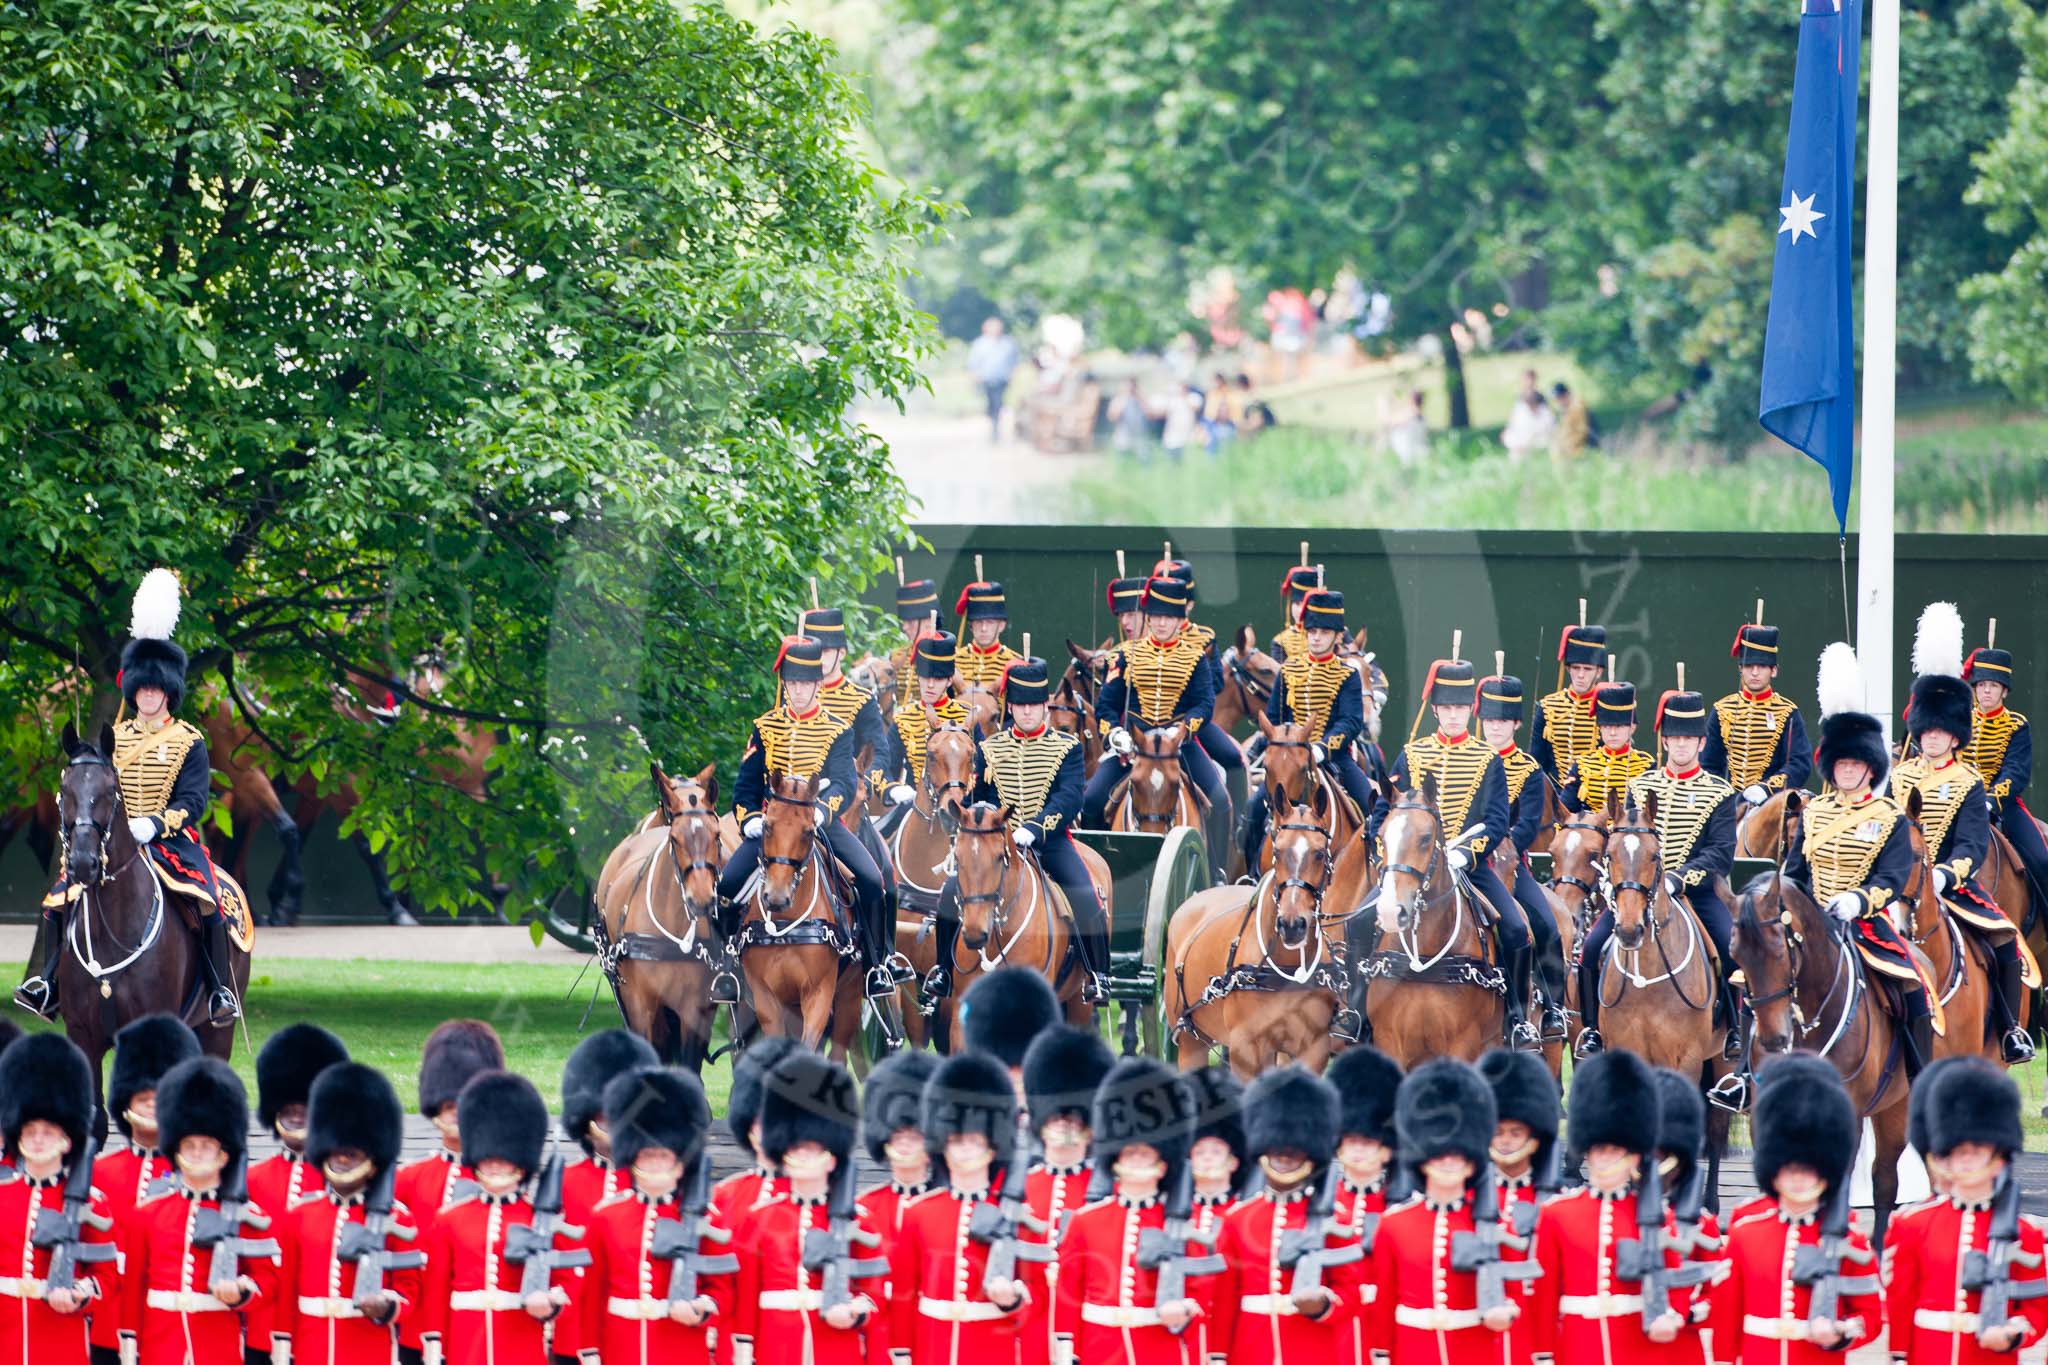 Trooping the Colour 2009: The King's Troop, Royal Horse Artillery, behind No. 1 Guard, the Escort for the Colour..
Horse Guards Parade, Westminster,
London SW1,

United Kingdom,
on 13 June 2009 at 10:37, image #71